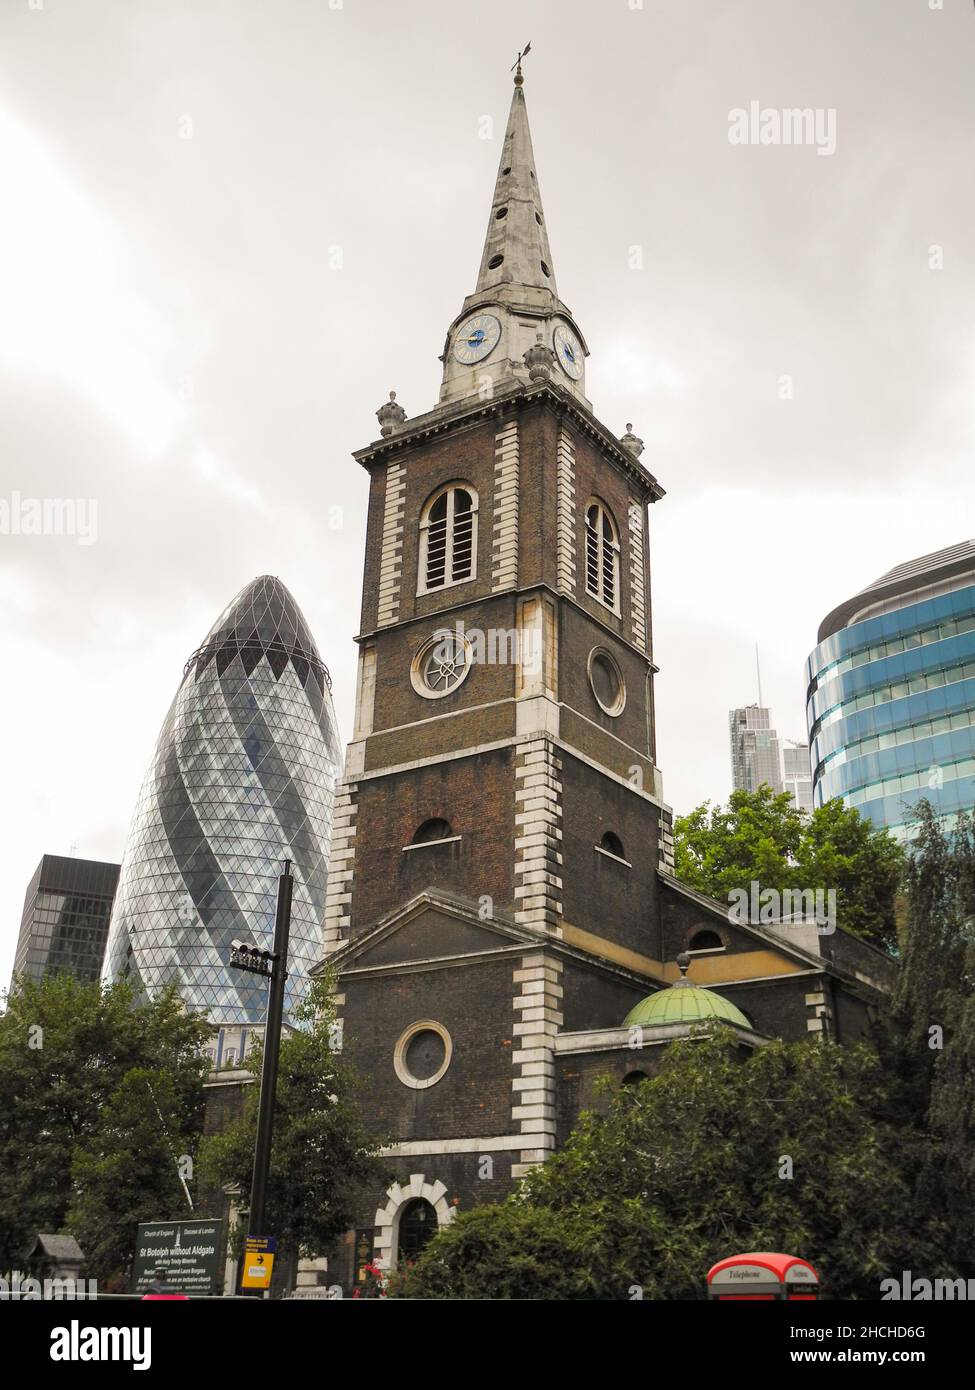 The church spire of St Botolph Without Aldgate, Aldgate High Street, London, EC3, England, U.K. Stock Photo